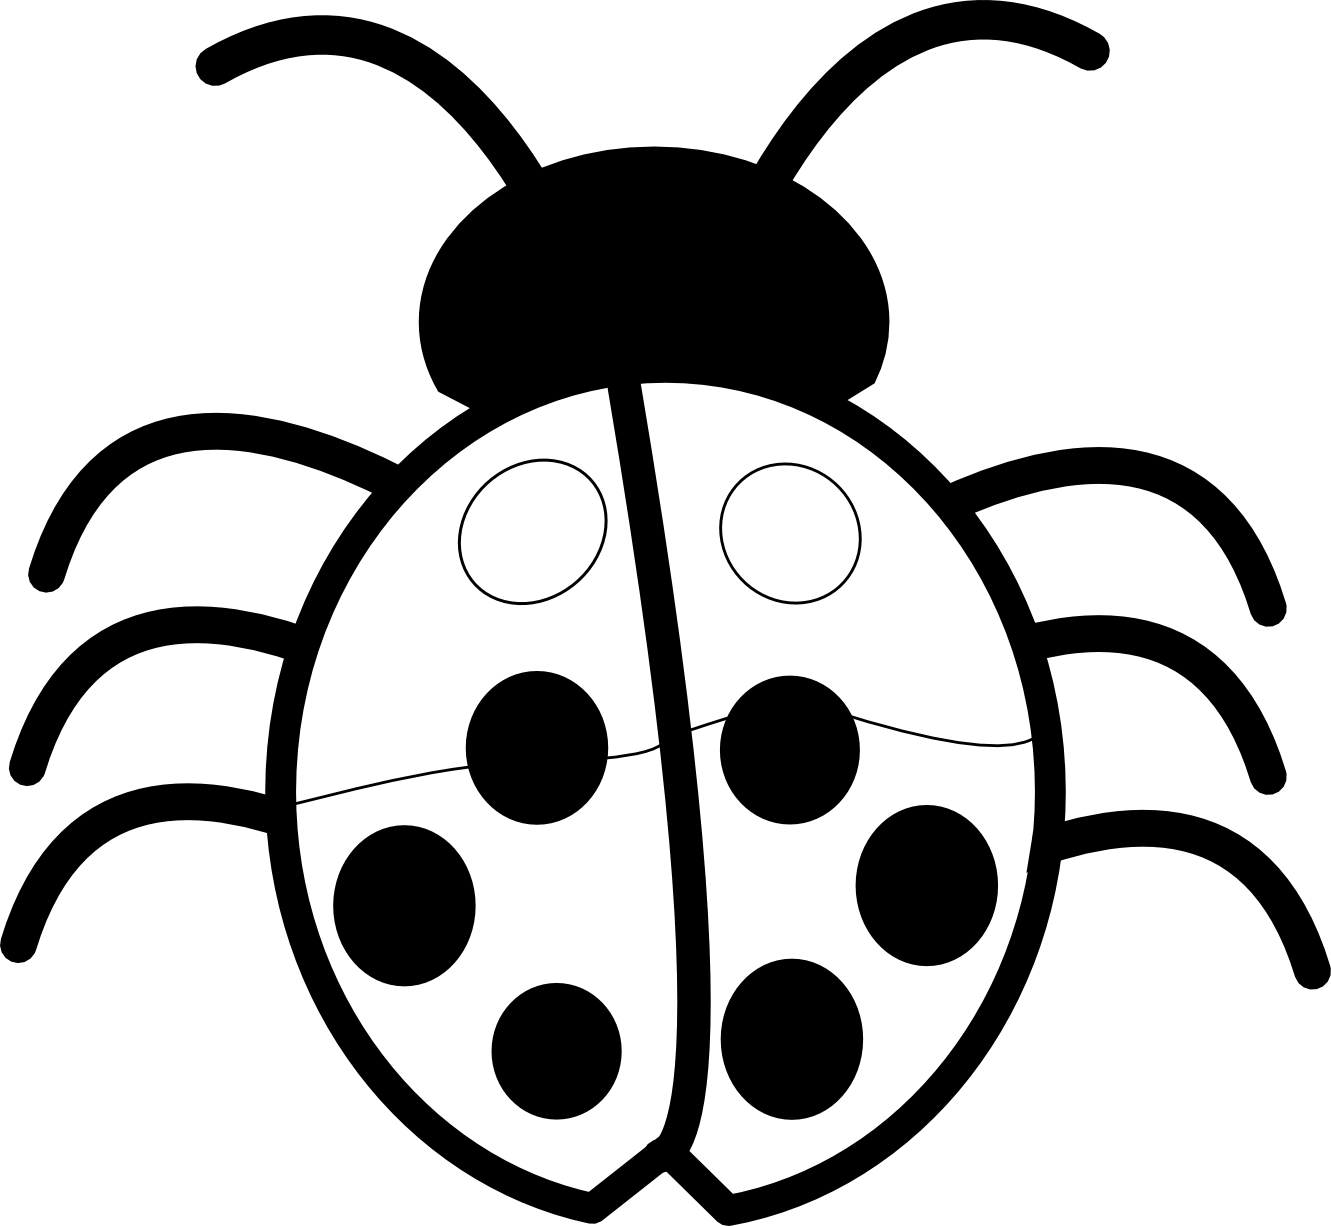 Ladybug Outline Black And White   Clipart Best